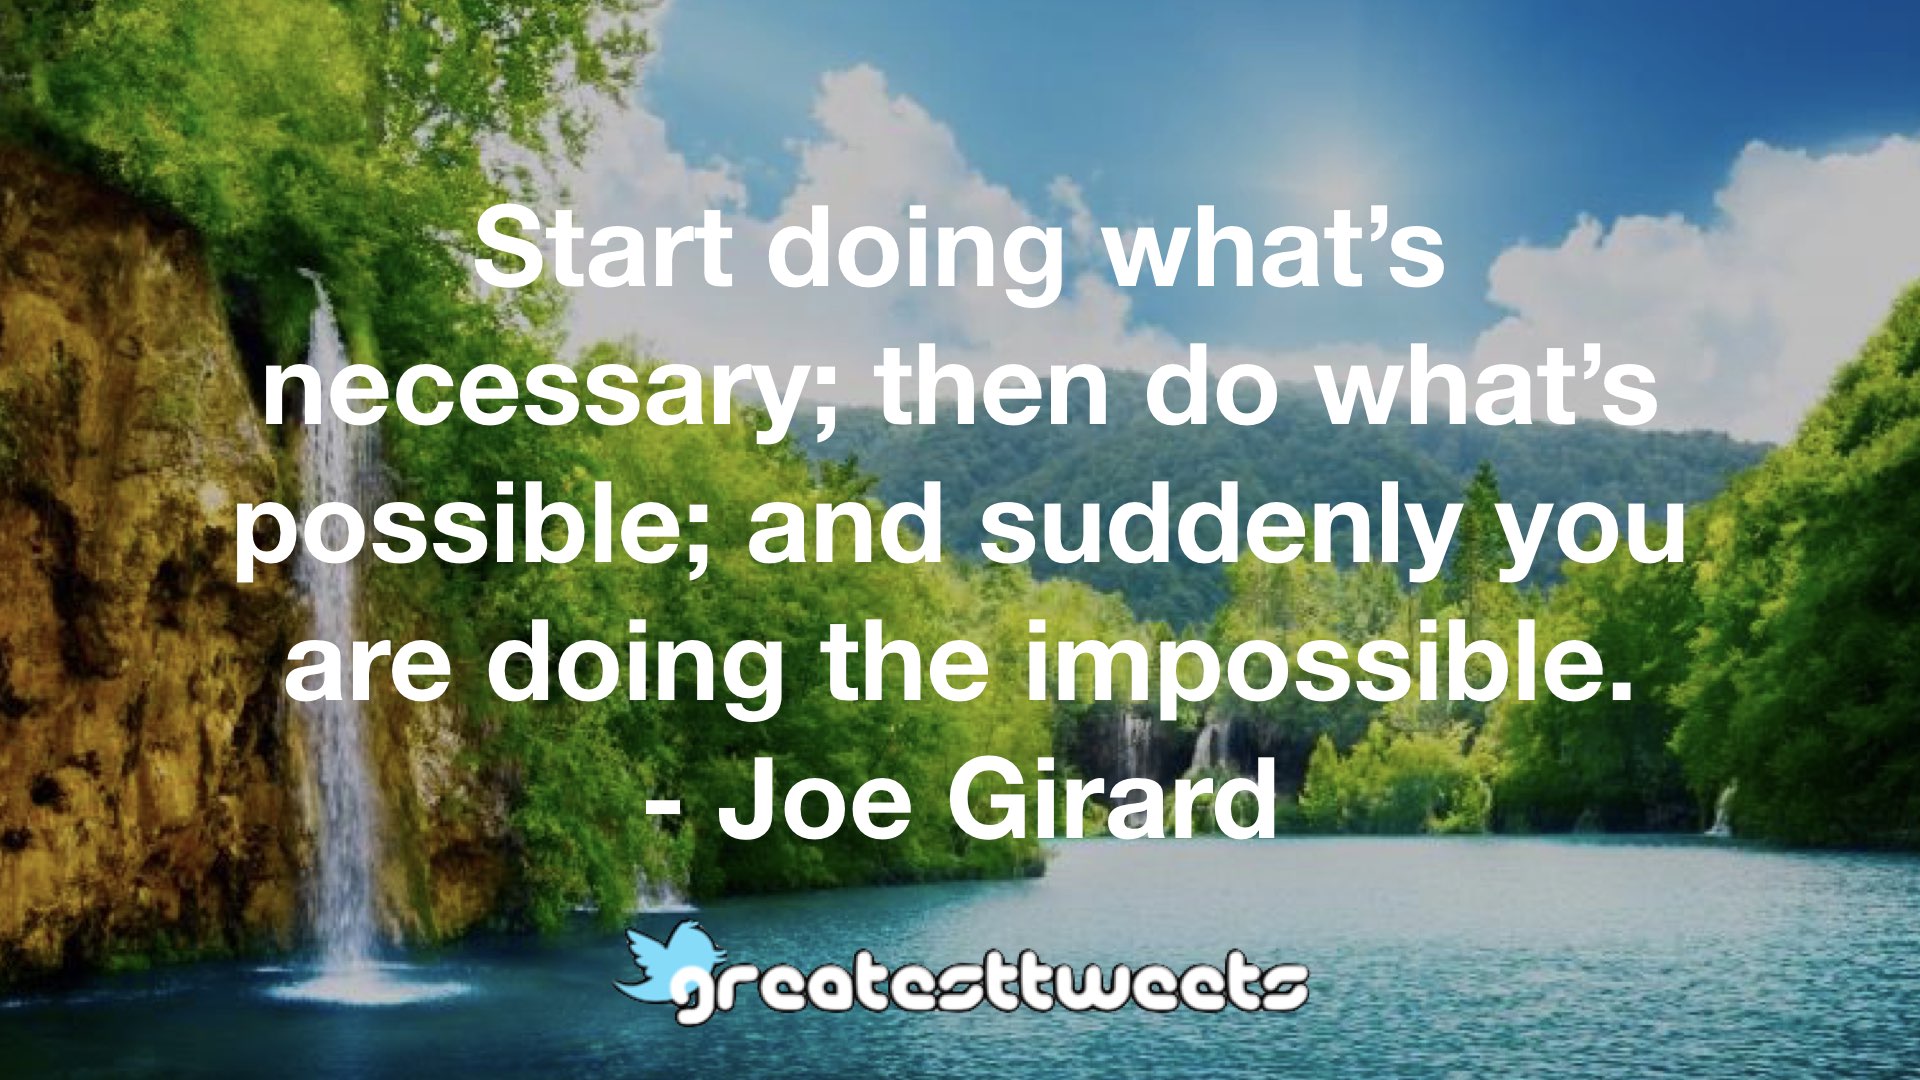 Start doing what's necessary; then do what's possible; and suddenly you are doing the impossible ...